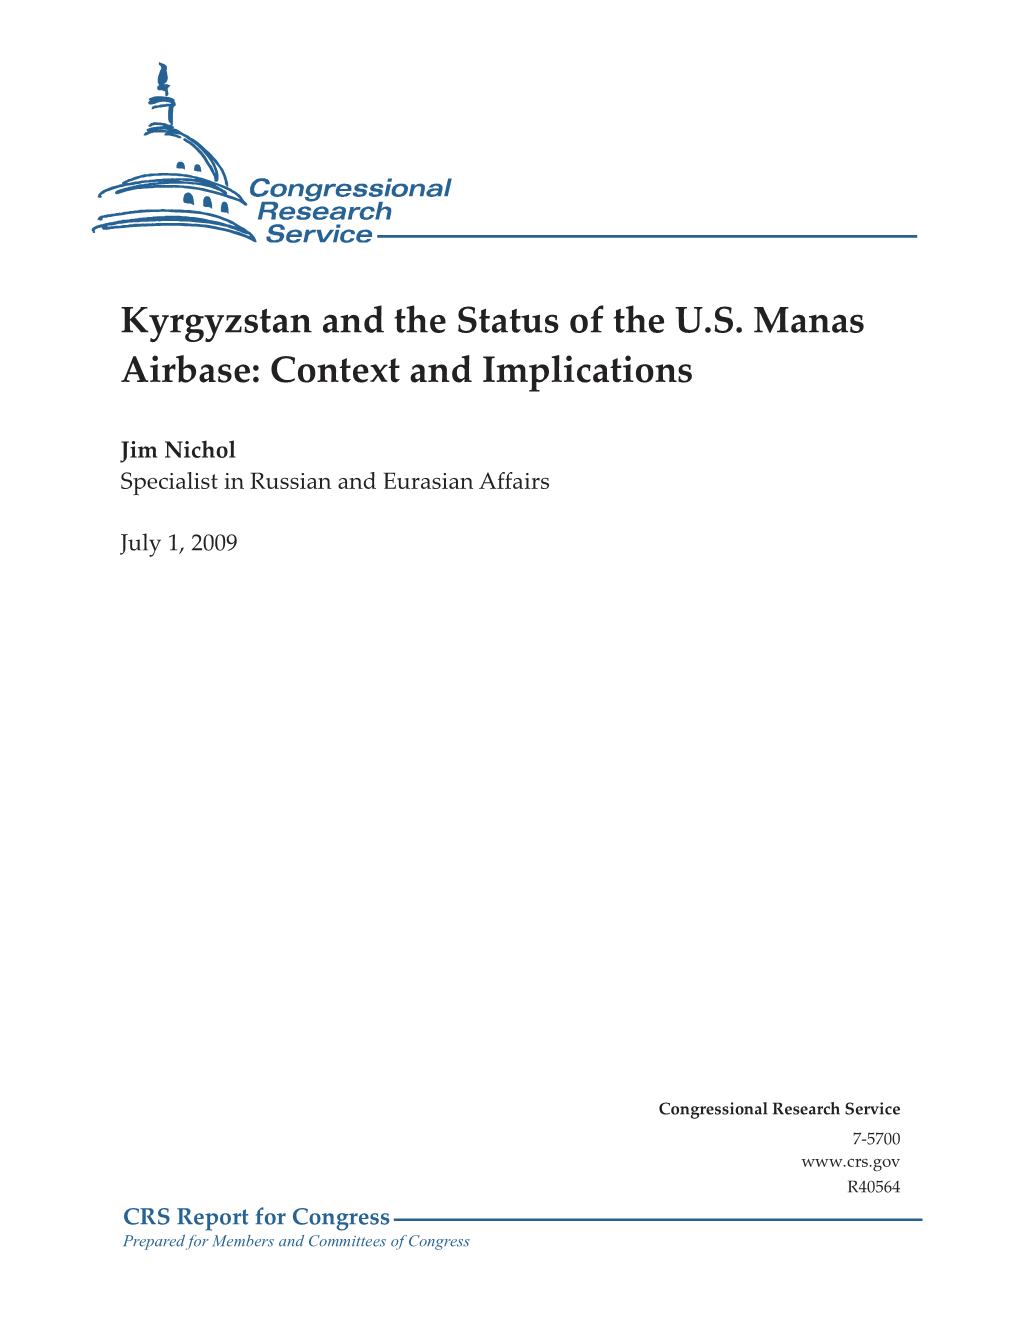 Kyrgyzstan and the Status of the U.S. Manas Airbase: Context and Implications